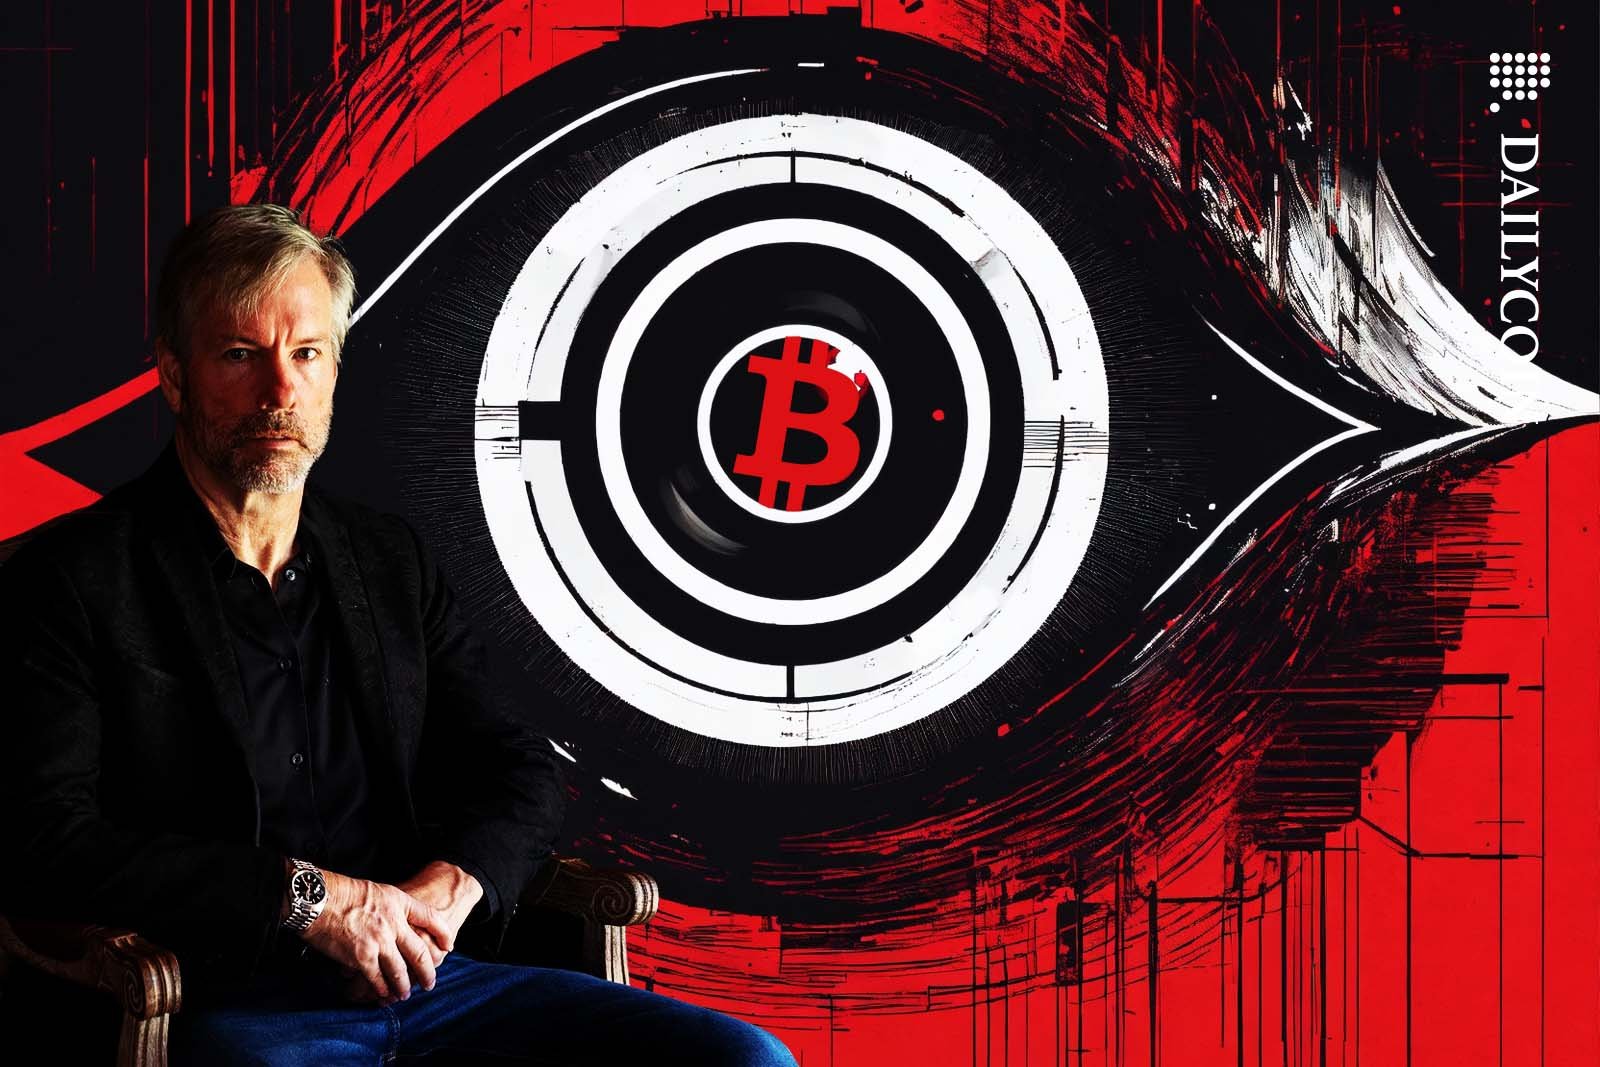 Michael Saylor of Microstrategy sitting infront of a huge Bitcoin Eye painting in 1984 cover art style.